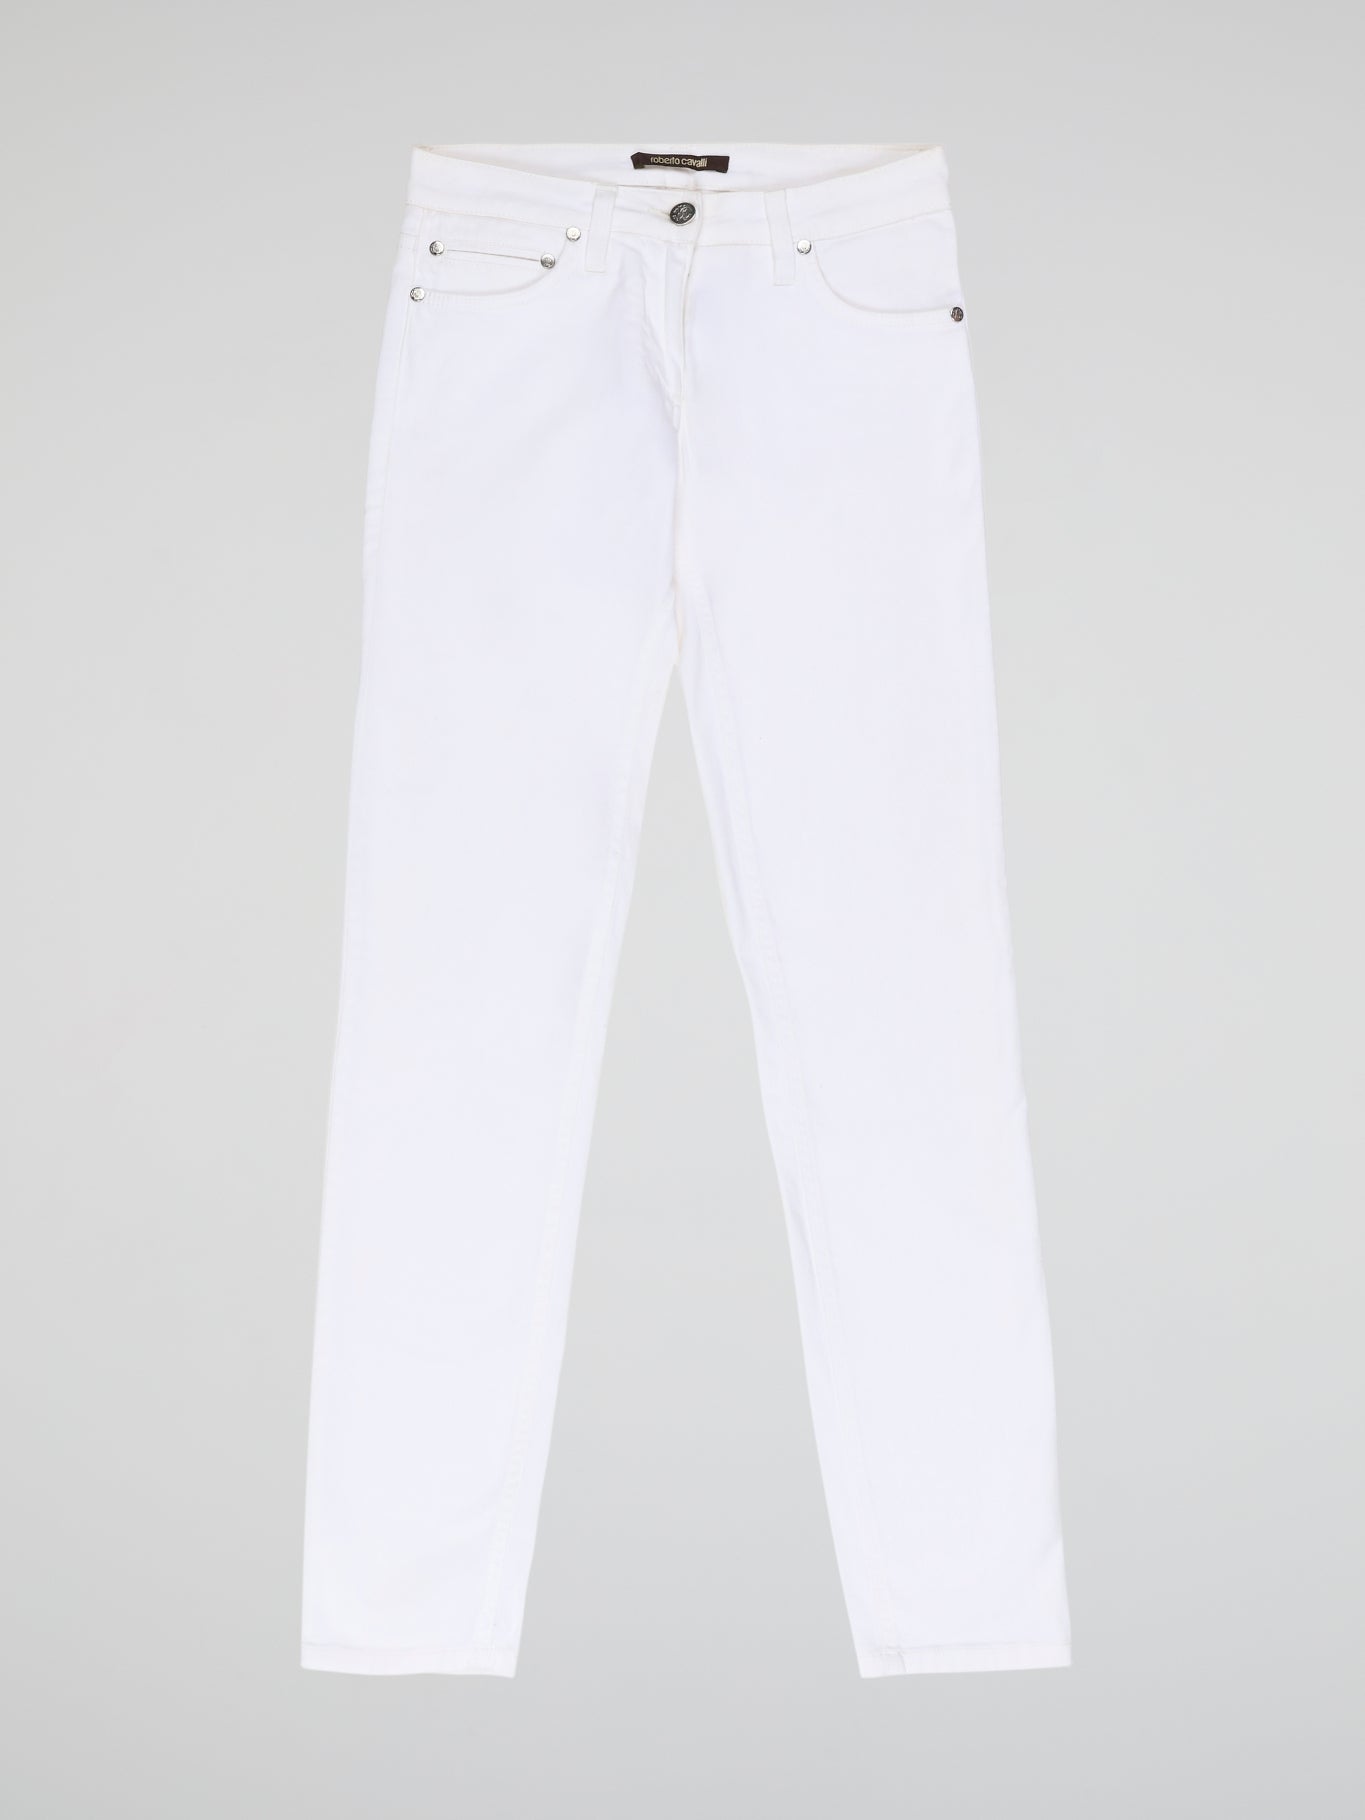 Turn heads and elevate your style with our White Straight Cut Jeans by Roberto Cavalli. Crafted with precision and attention to detail, these jeans feature a sleek and modern design that embodies sophistication and confidence. Whether you're strolling through the city or hitting the beach, these jeans are sure to make a statement and redefine your fashion game.